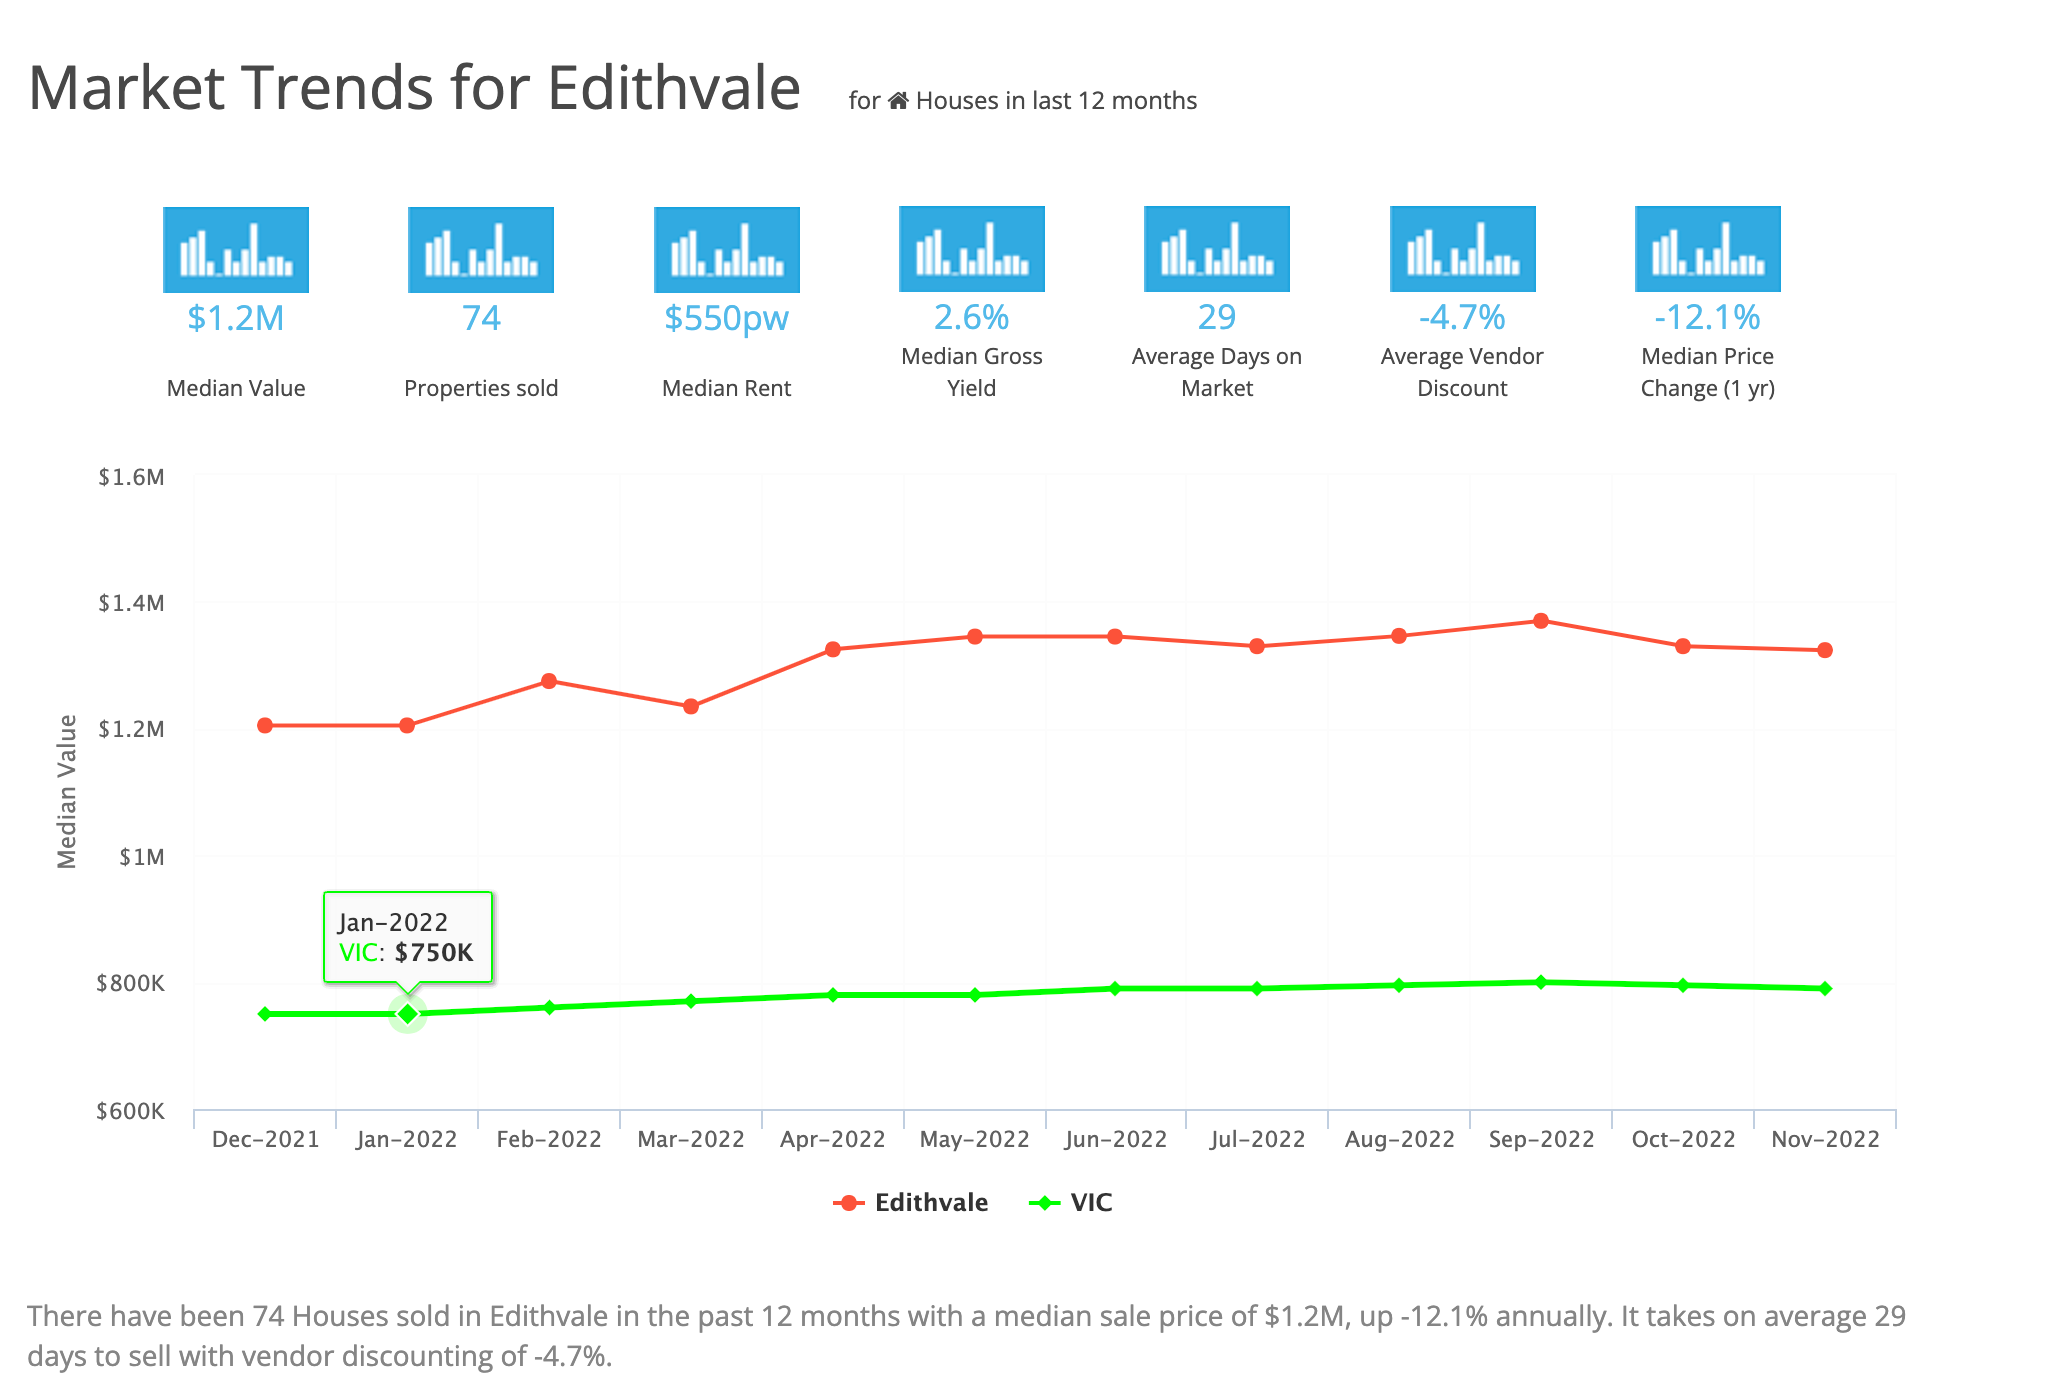 Market Trends for Edithvale March 2023